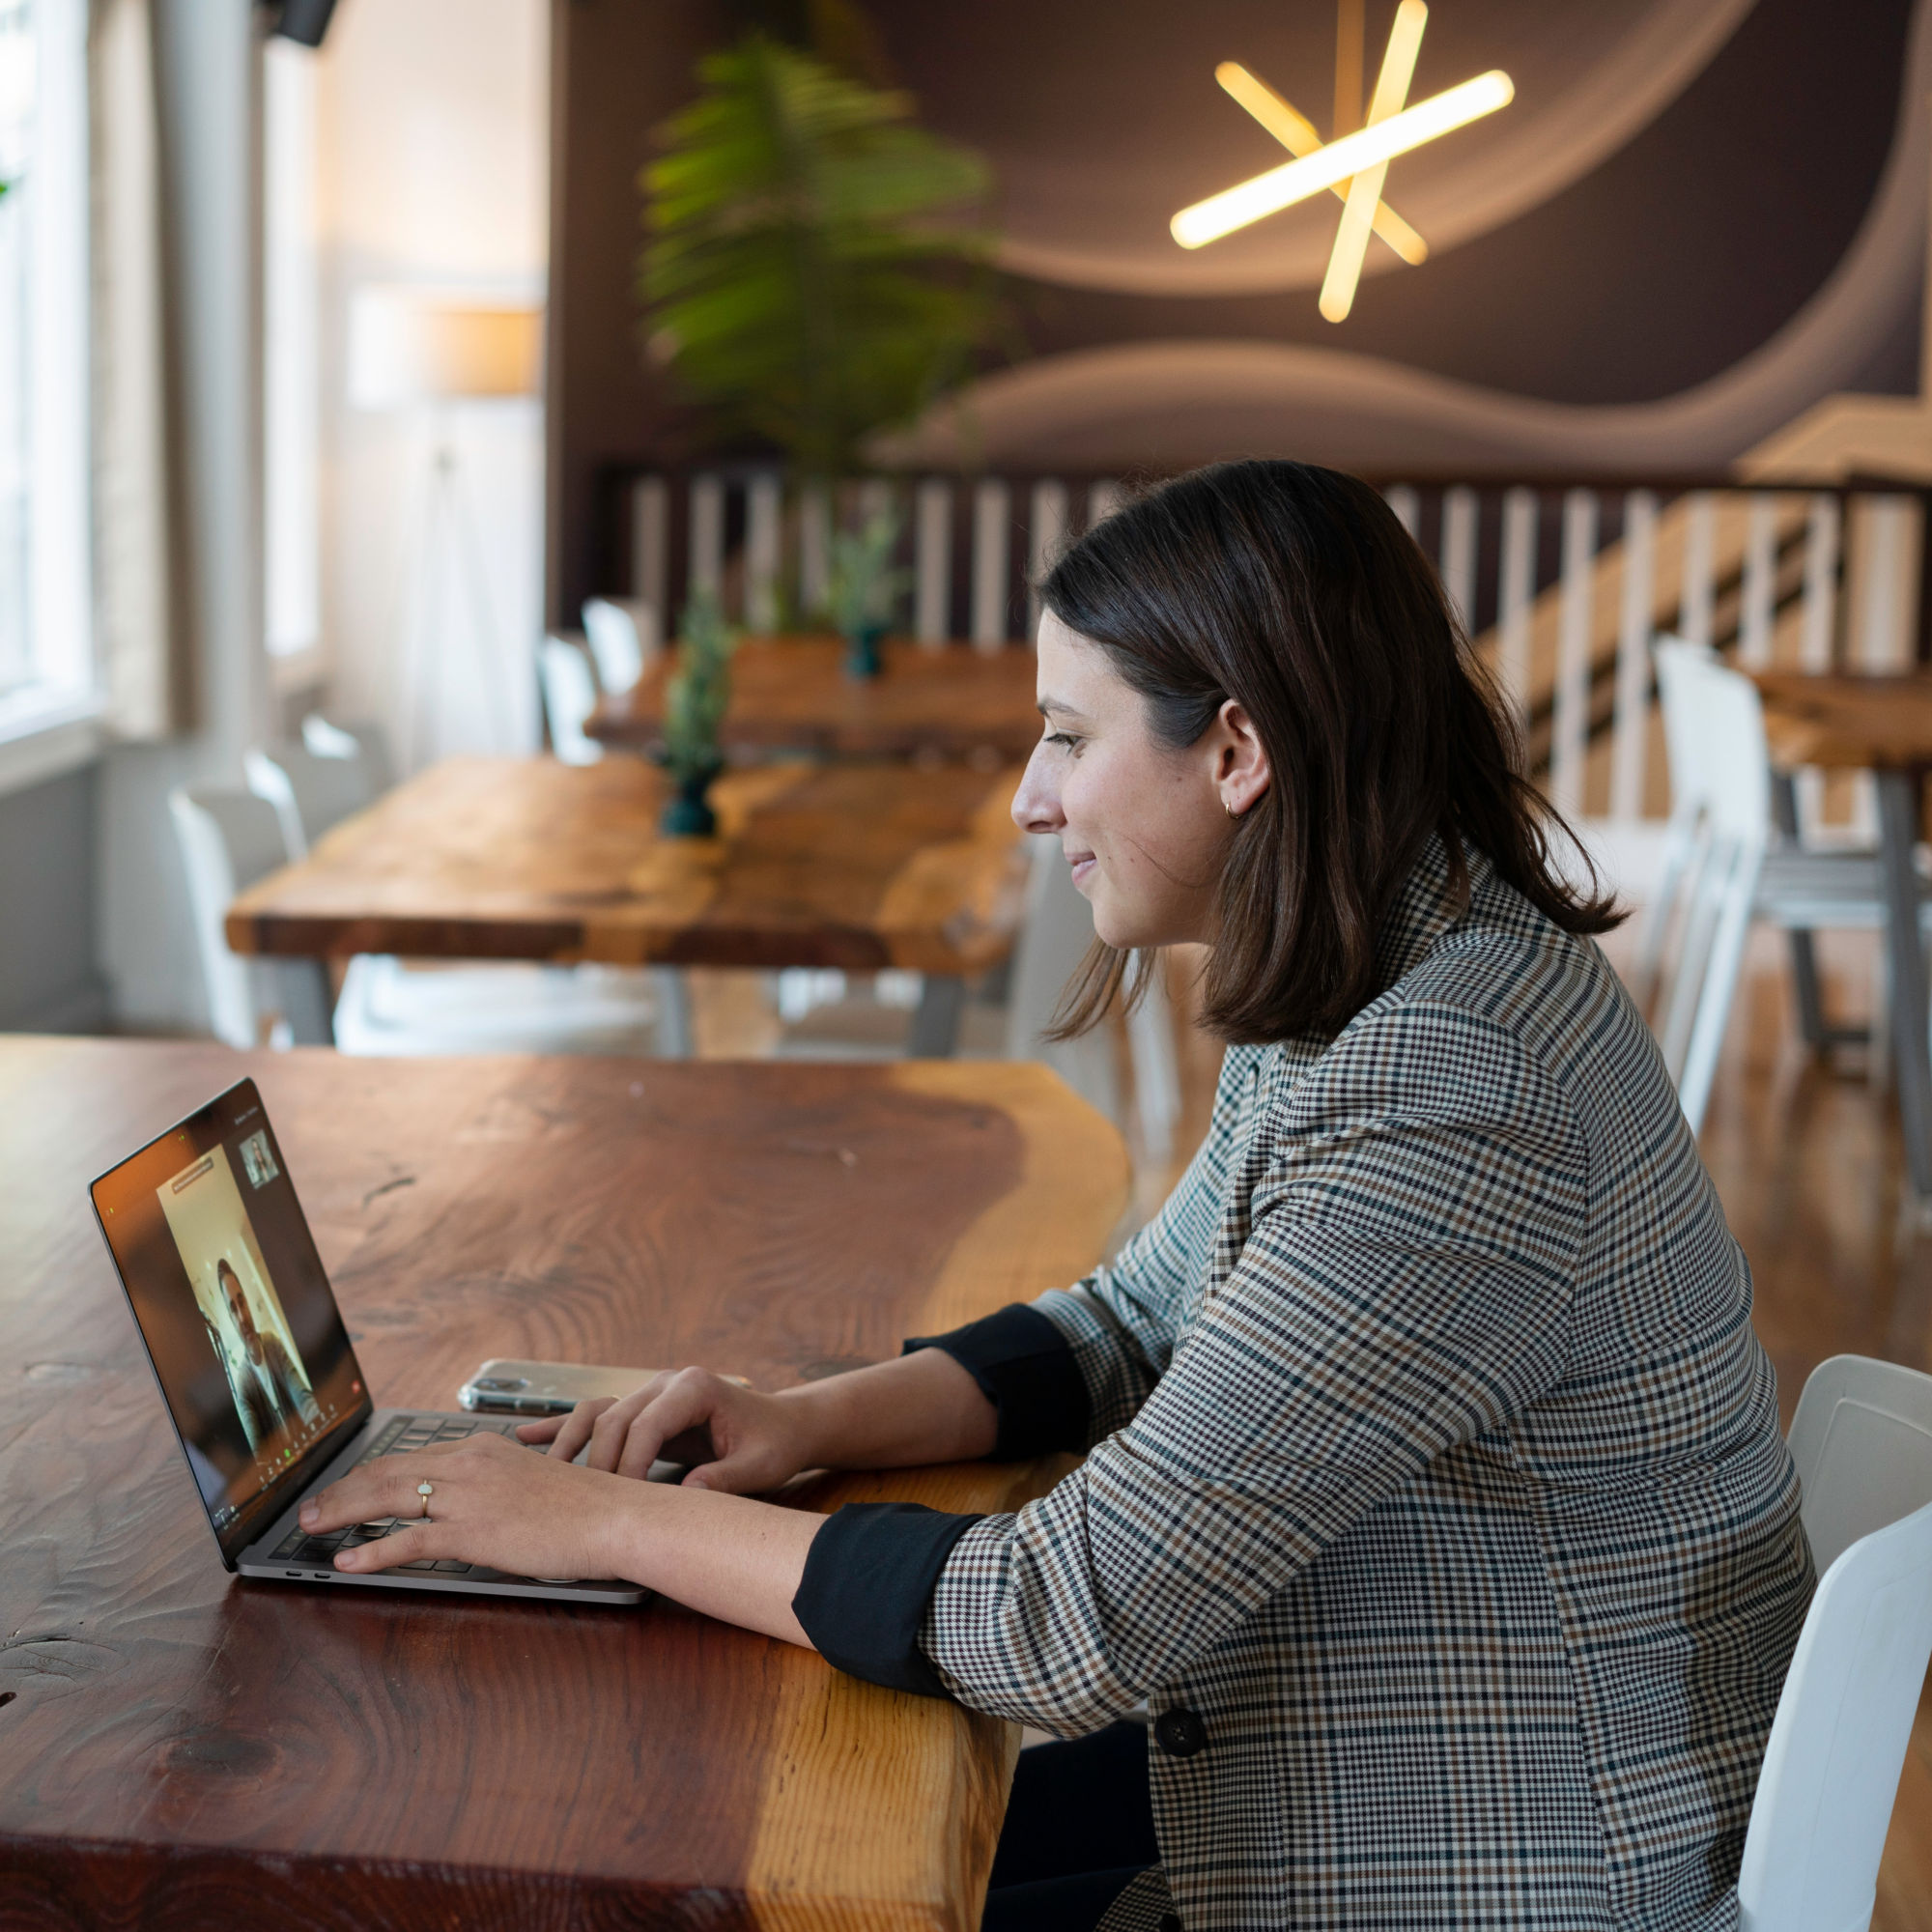 Image of a woman in professional attire having a virtual conversation with someone on her laptop for the blog "Both Interview Skills and Cultural Competence Are Needed in a Tight Labor Market"